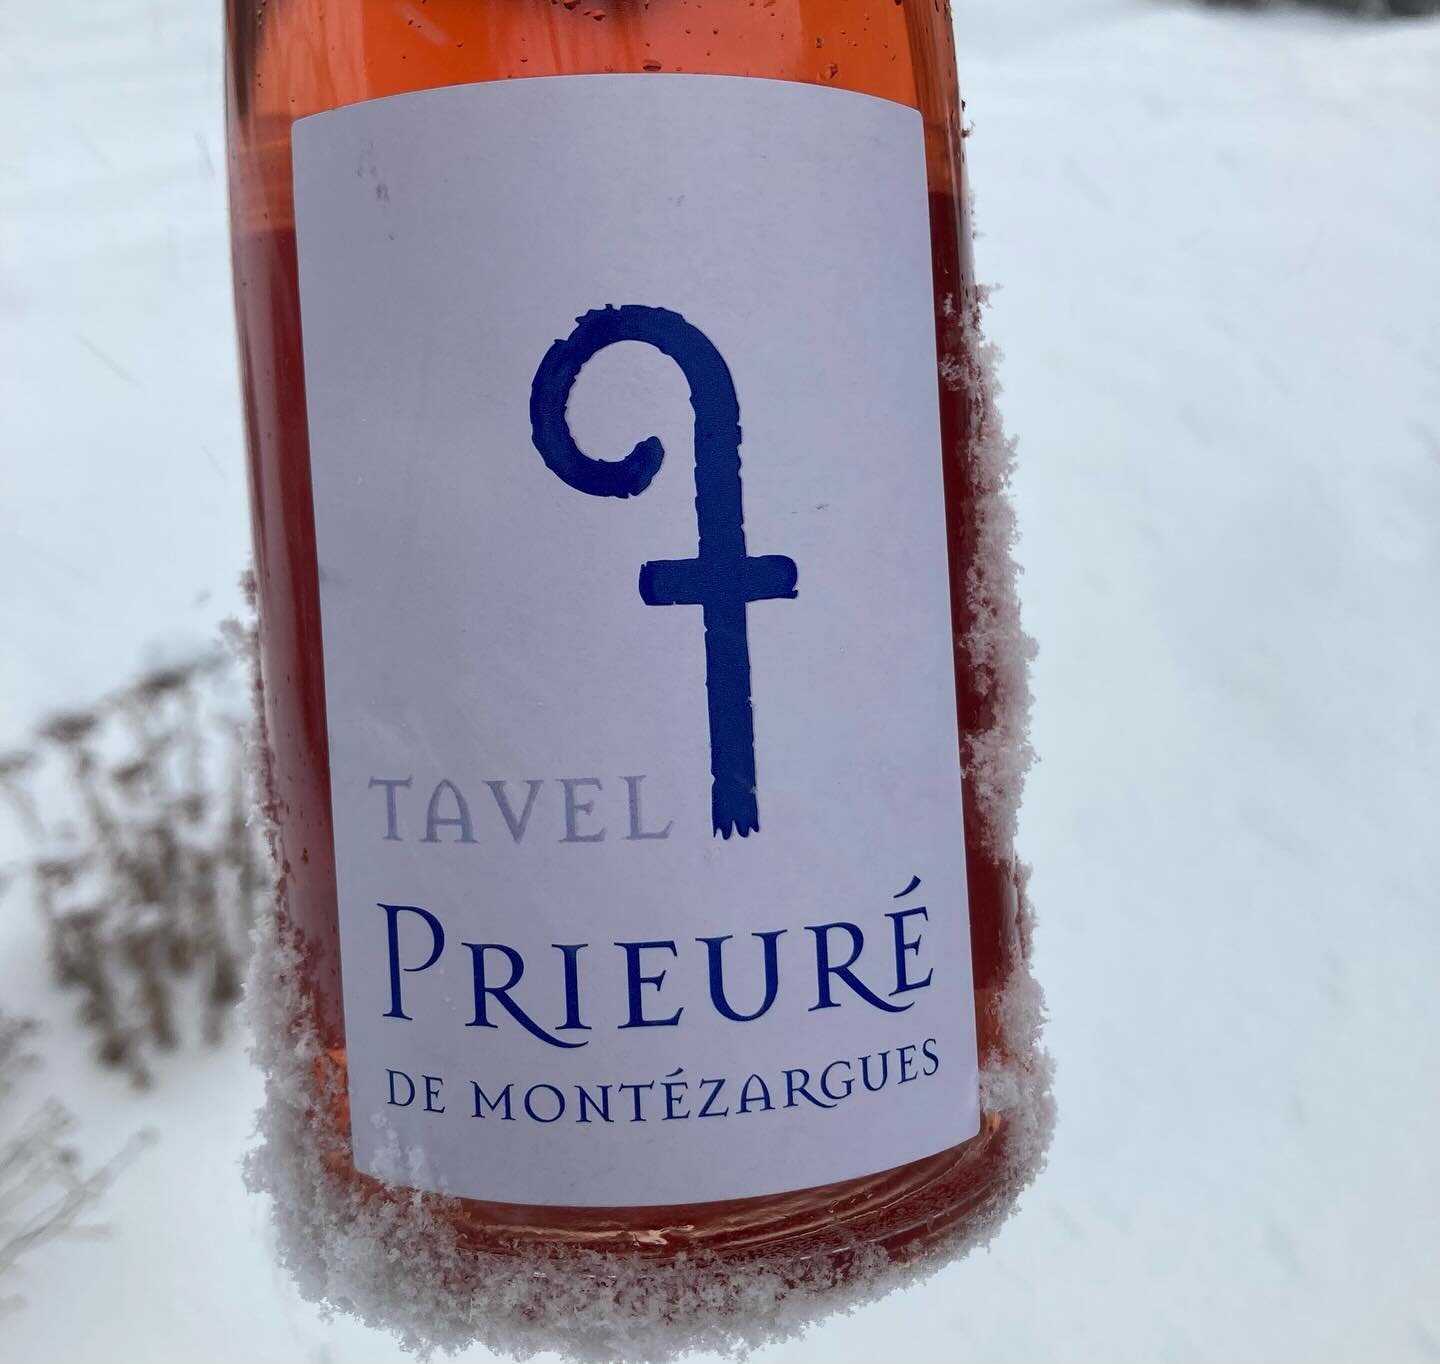 A snow storm has blown in so I&rsquo;m staying home. I&rsquo;ve lit a fire and grabbed a bottle of @prieuredemontezargues Tavel 2022. Happy Leap Day! (A blend of Grenache, Cinsault, Clairette and Syrah) #leapday #tavel #rosewine #prieur&eacute;demont